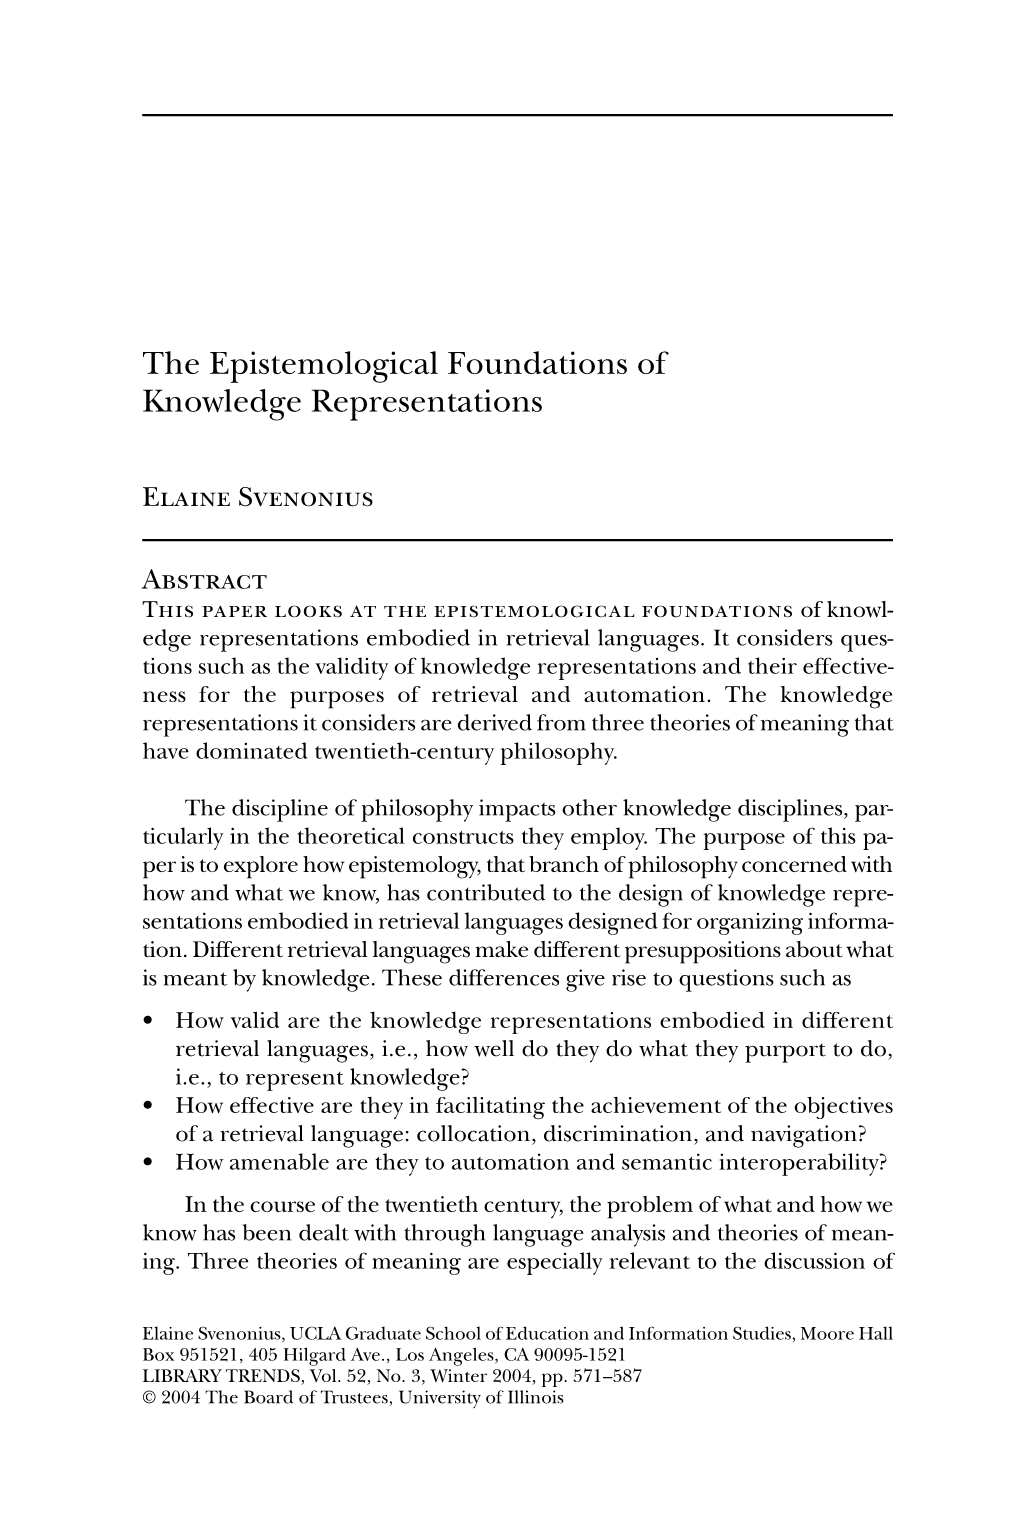 The Epistemological Foundations of Knowledge Representations